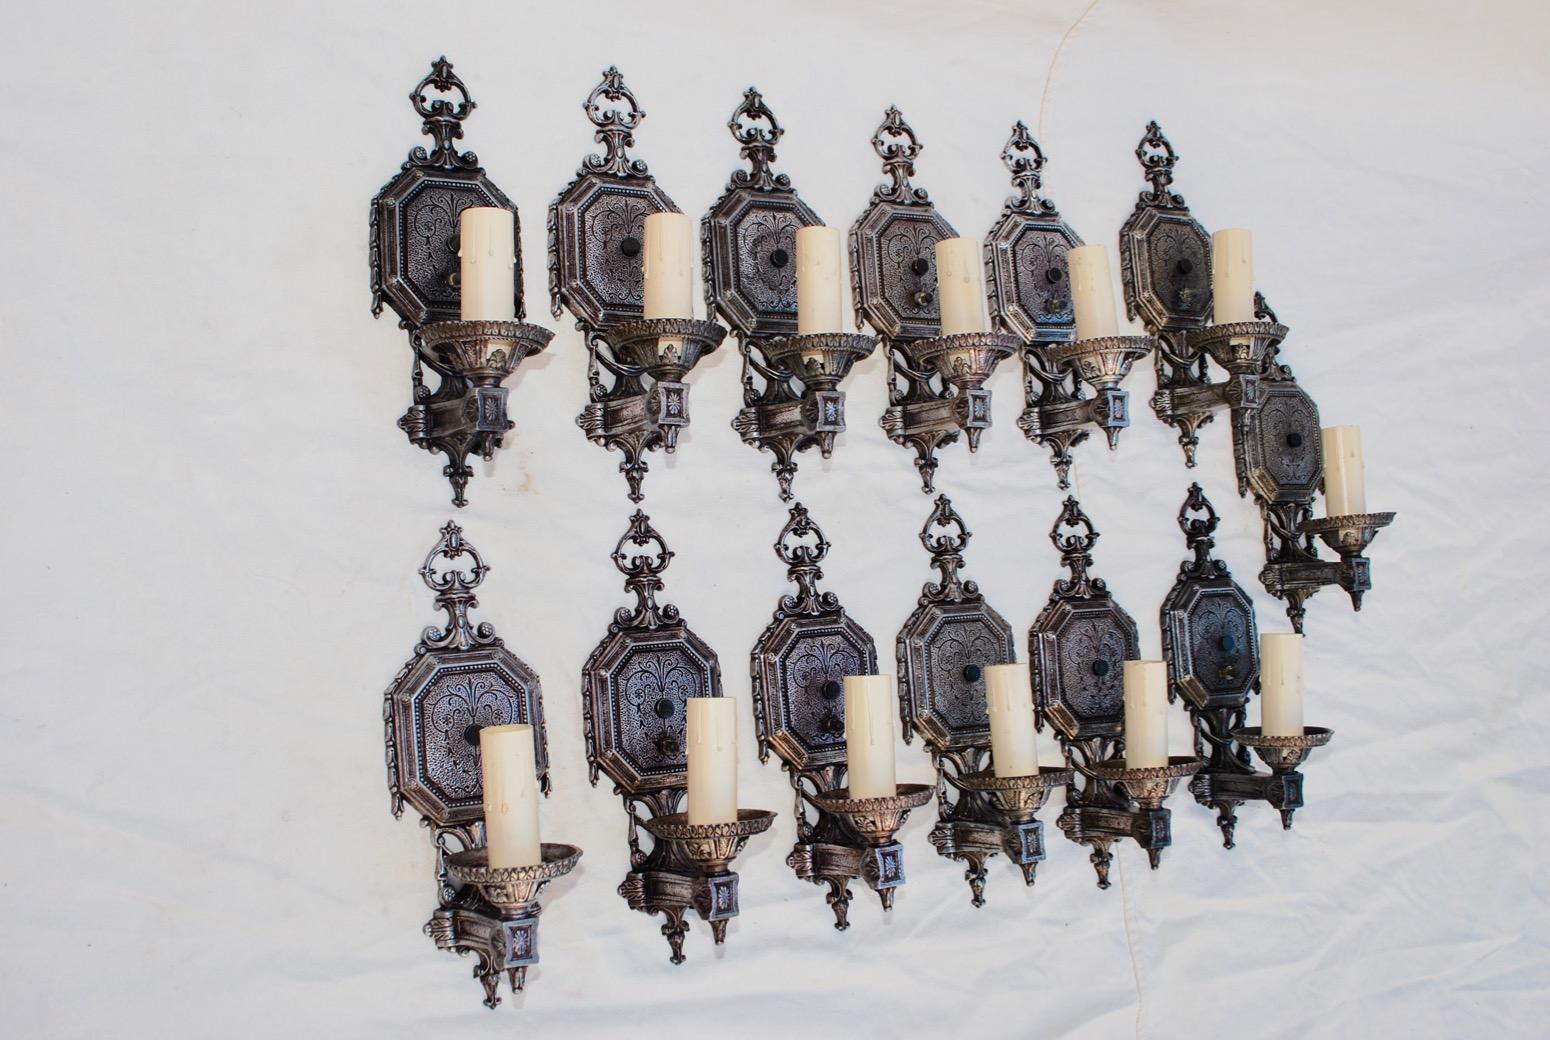 We have over 3000 antique sconces and over 1000 antique lights, if you need a specific pair of sconces or lights use the 